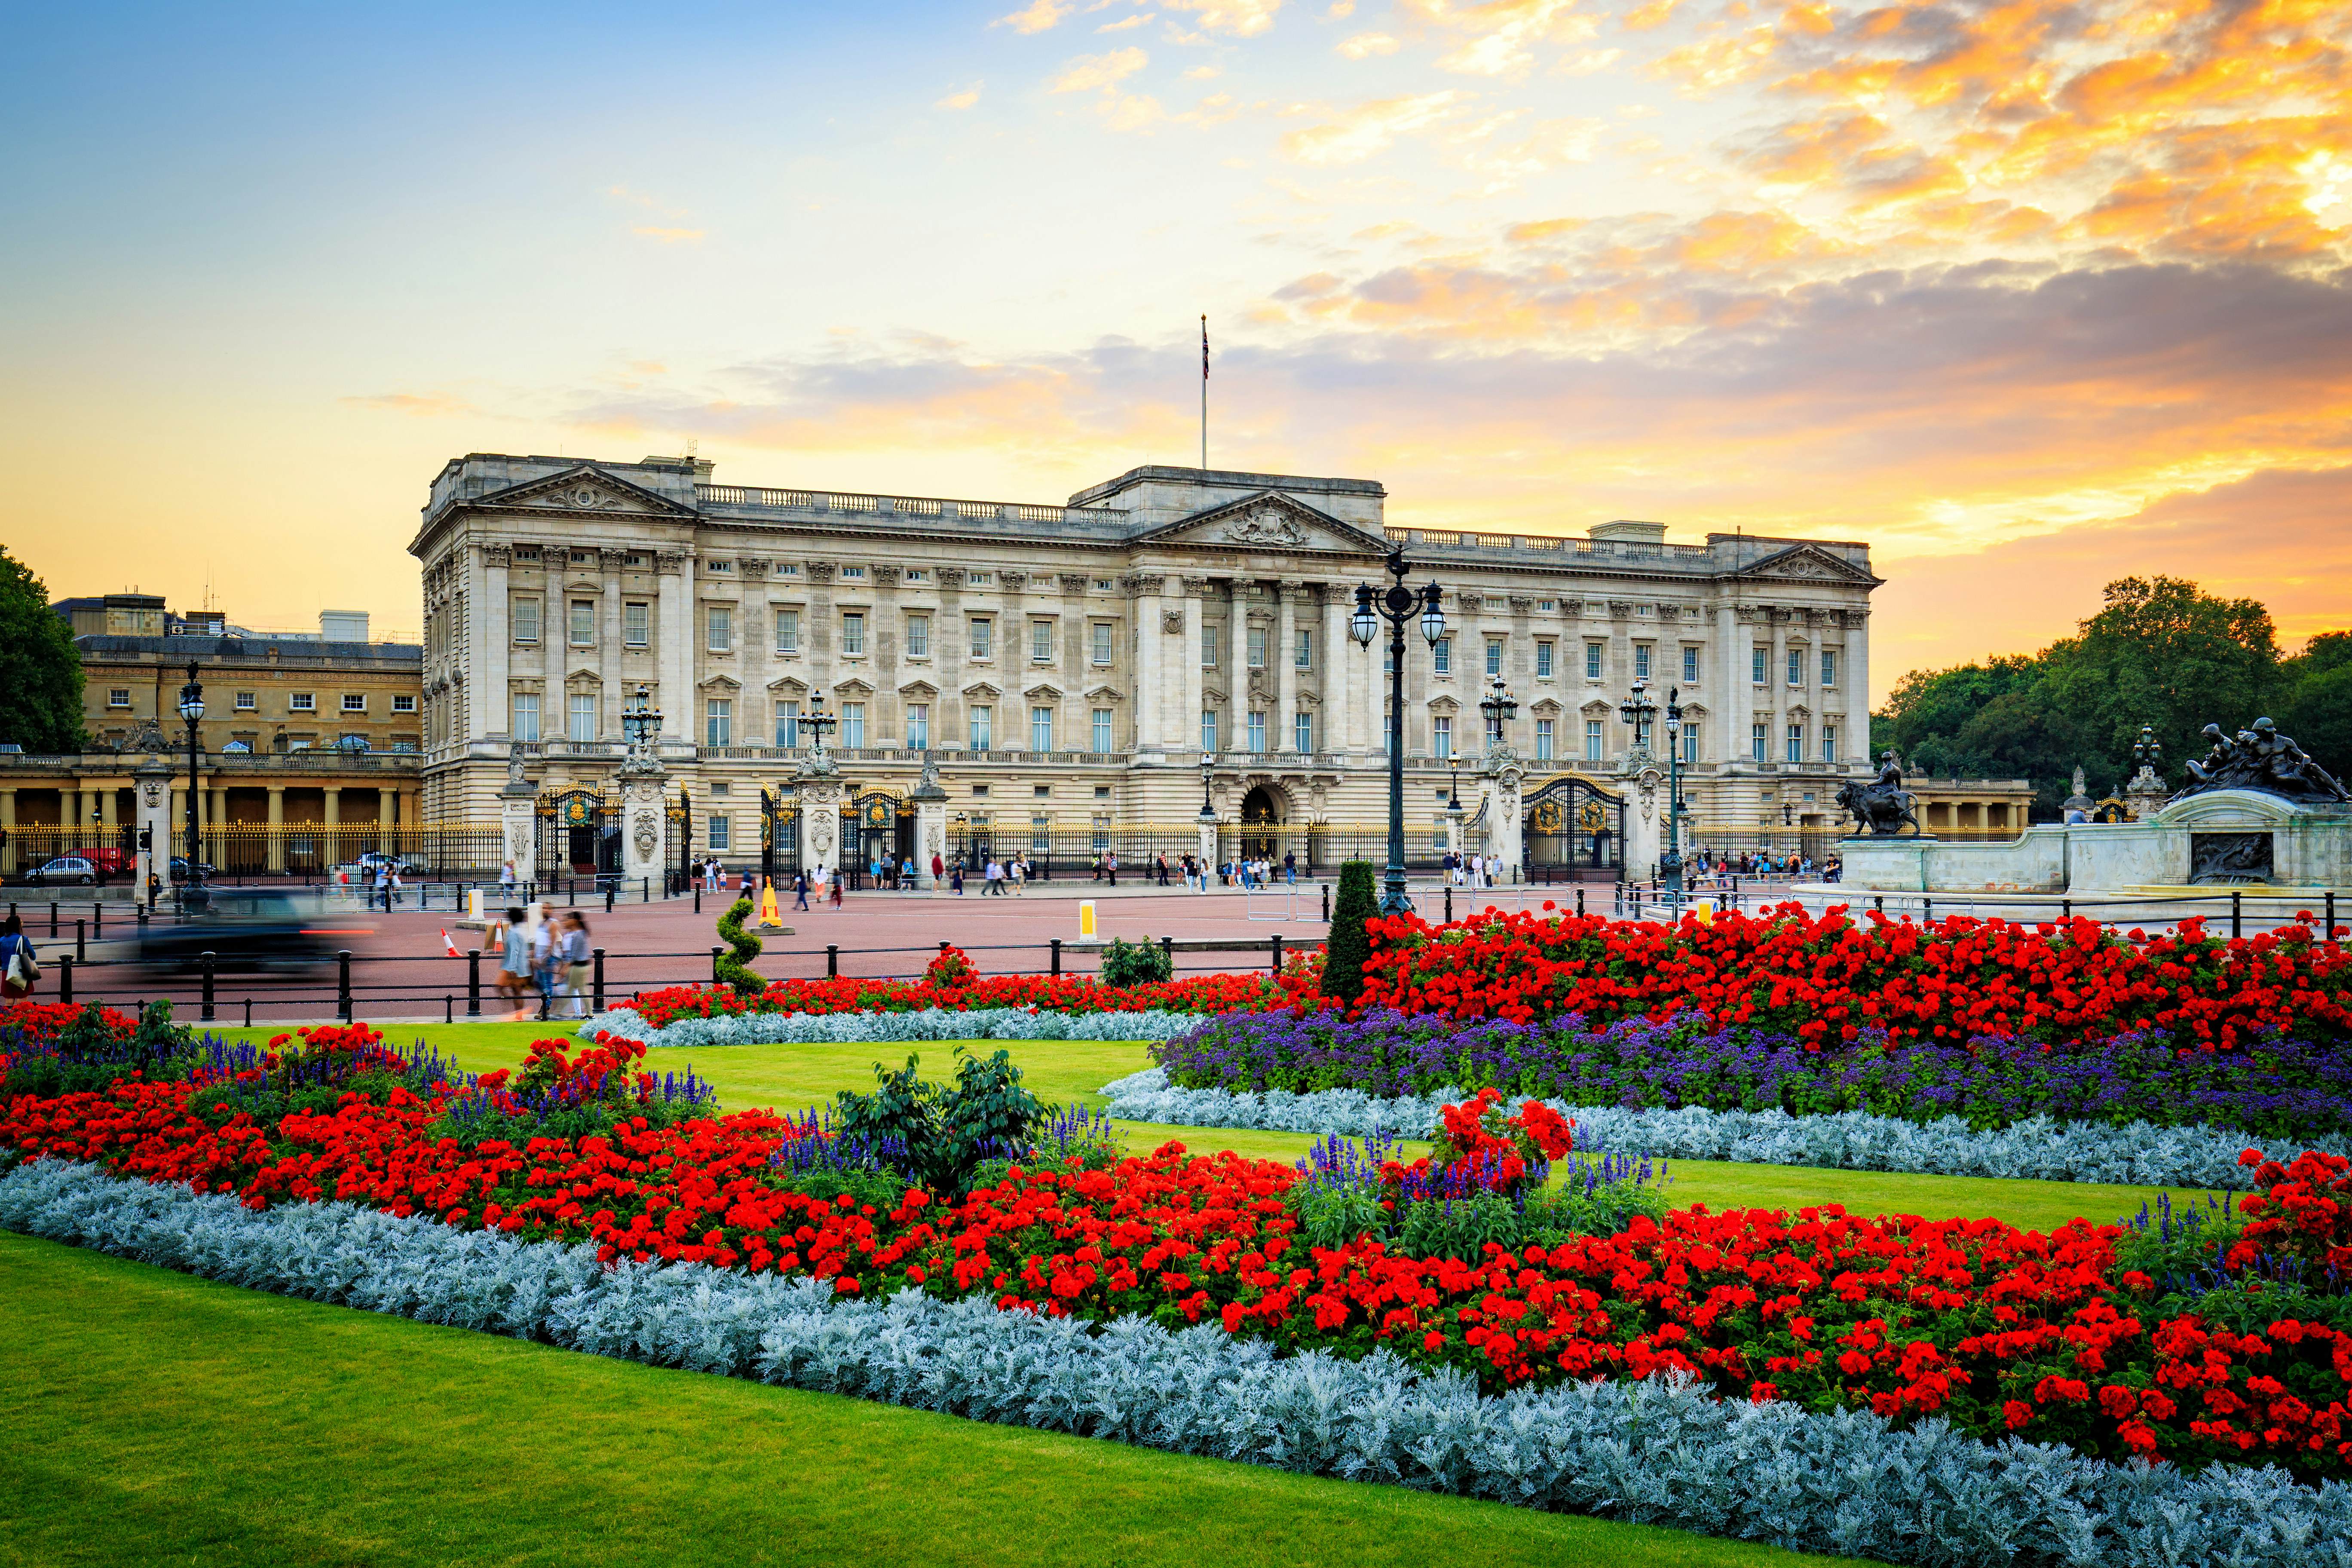 Buckingham Palace | The West End, London | Attractions - Lonely Planet